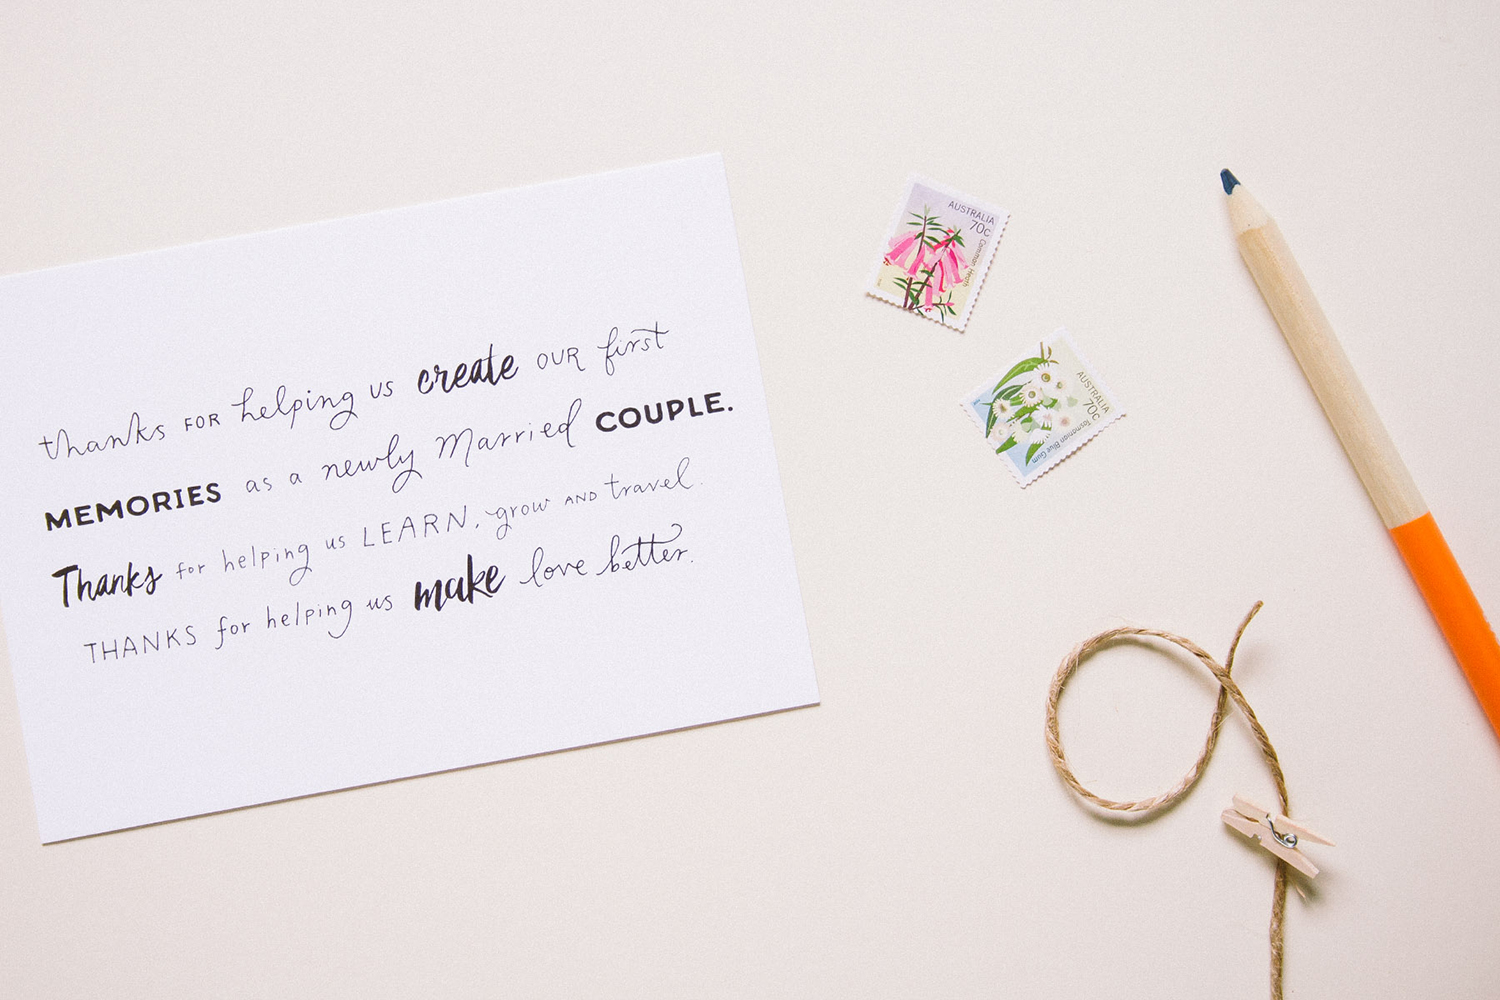 envelope uses robots to write thank you notes for your wedding landscape tyc writing